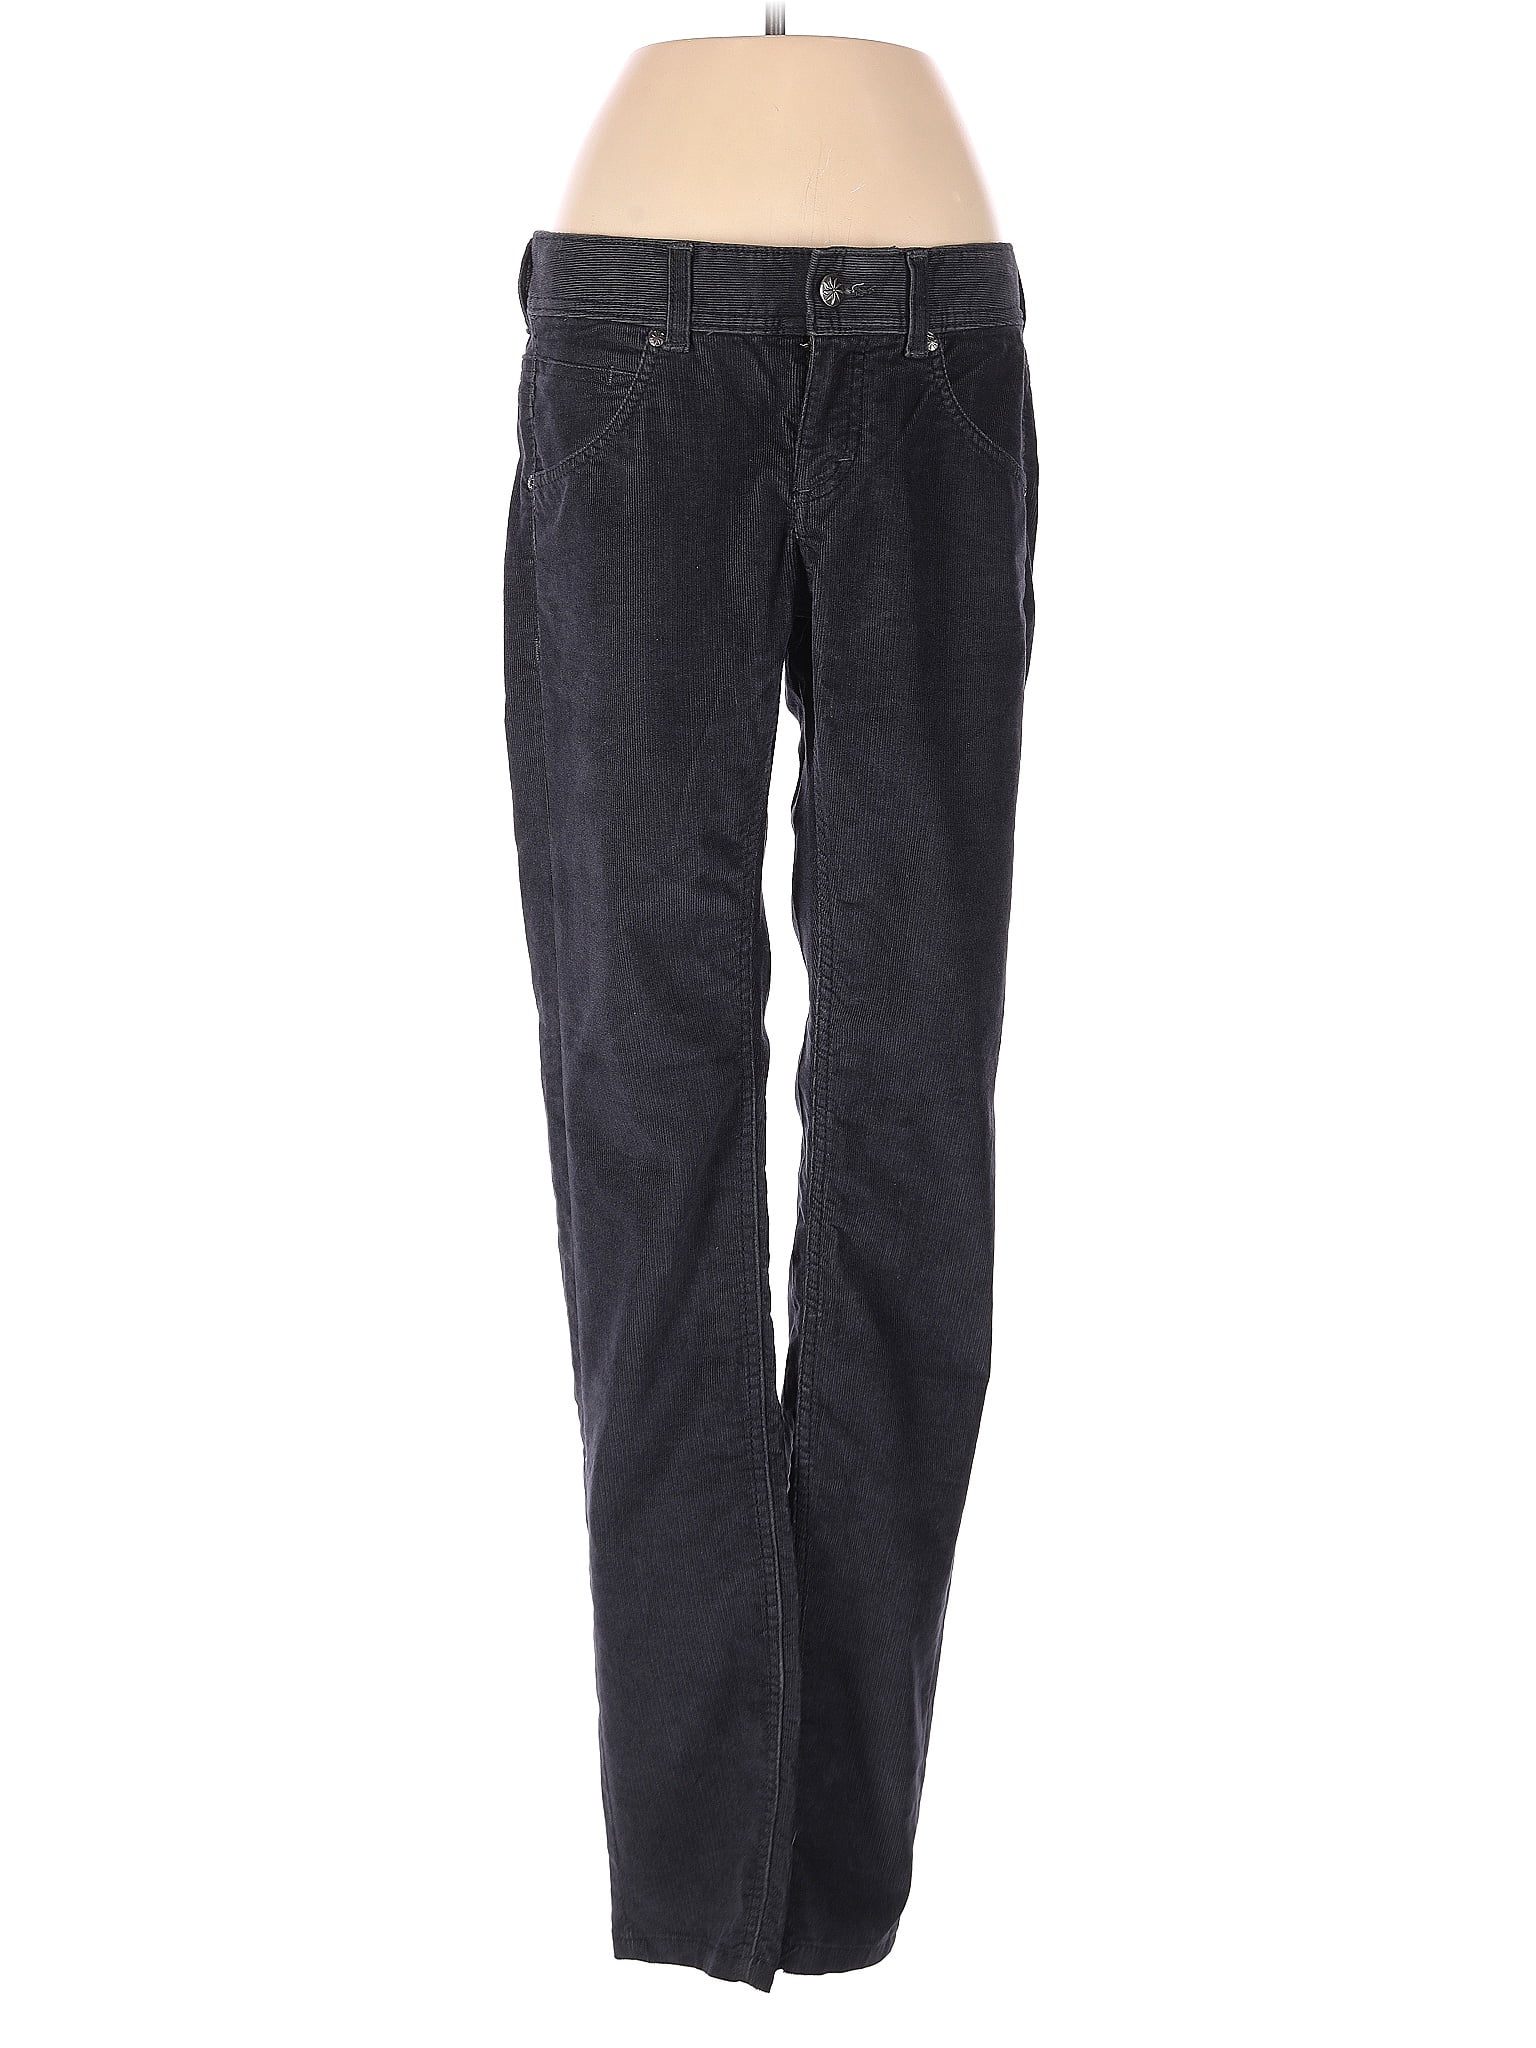 Athleta Corduroy Dipper Pants Black Size 2 - $28 - From Resell